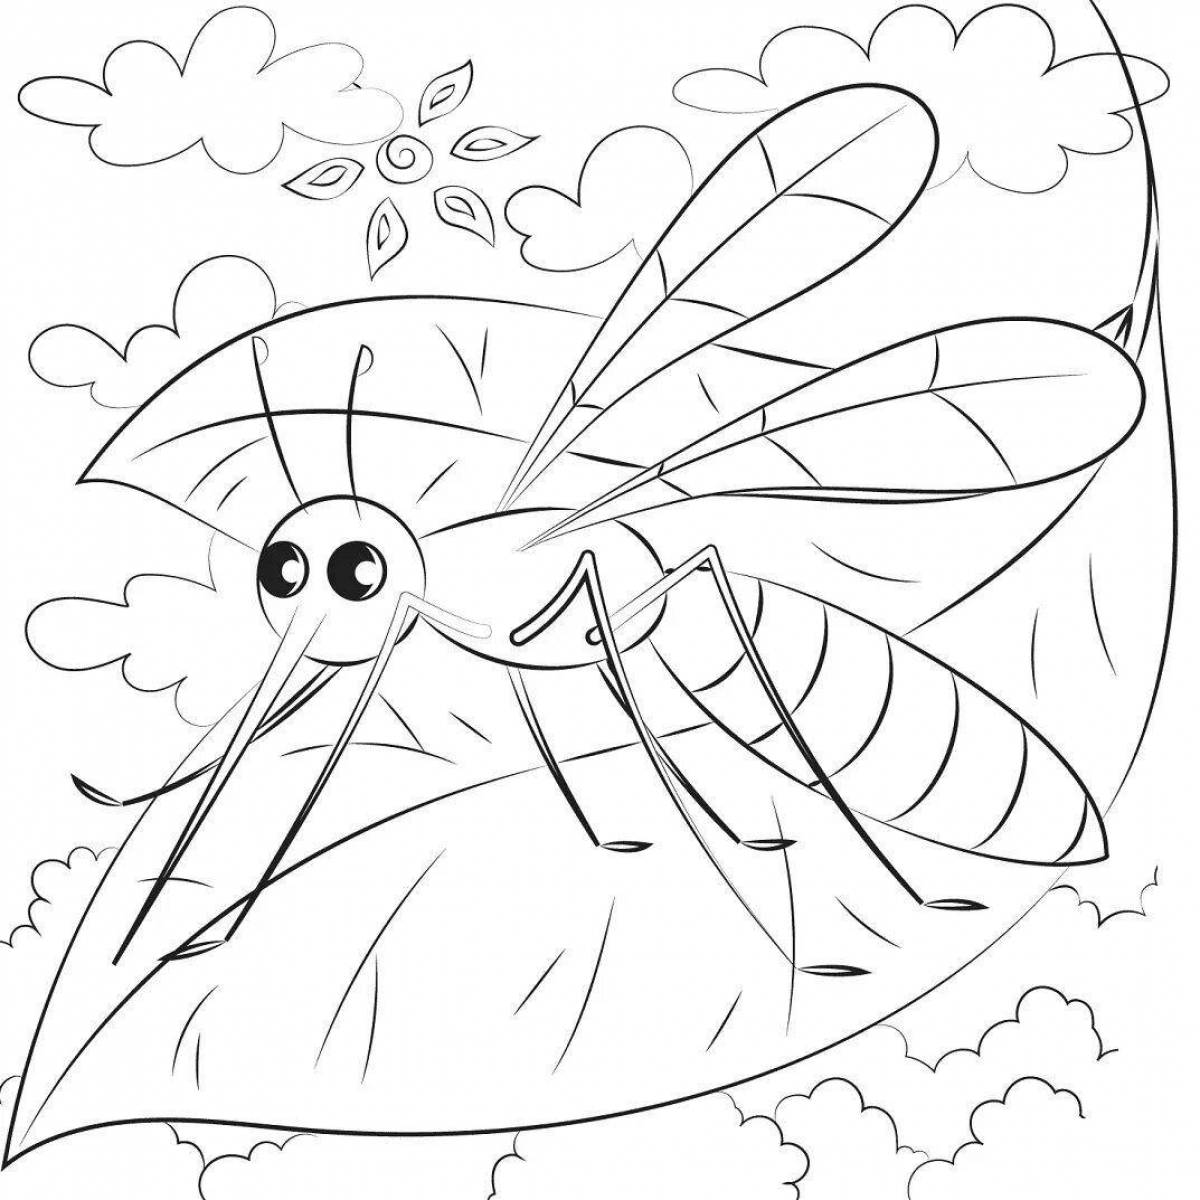 Merry mosquito coloring book for kids